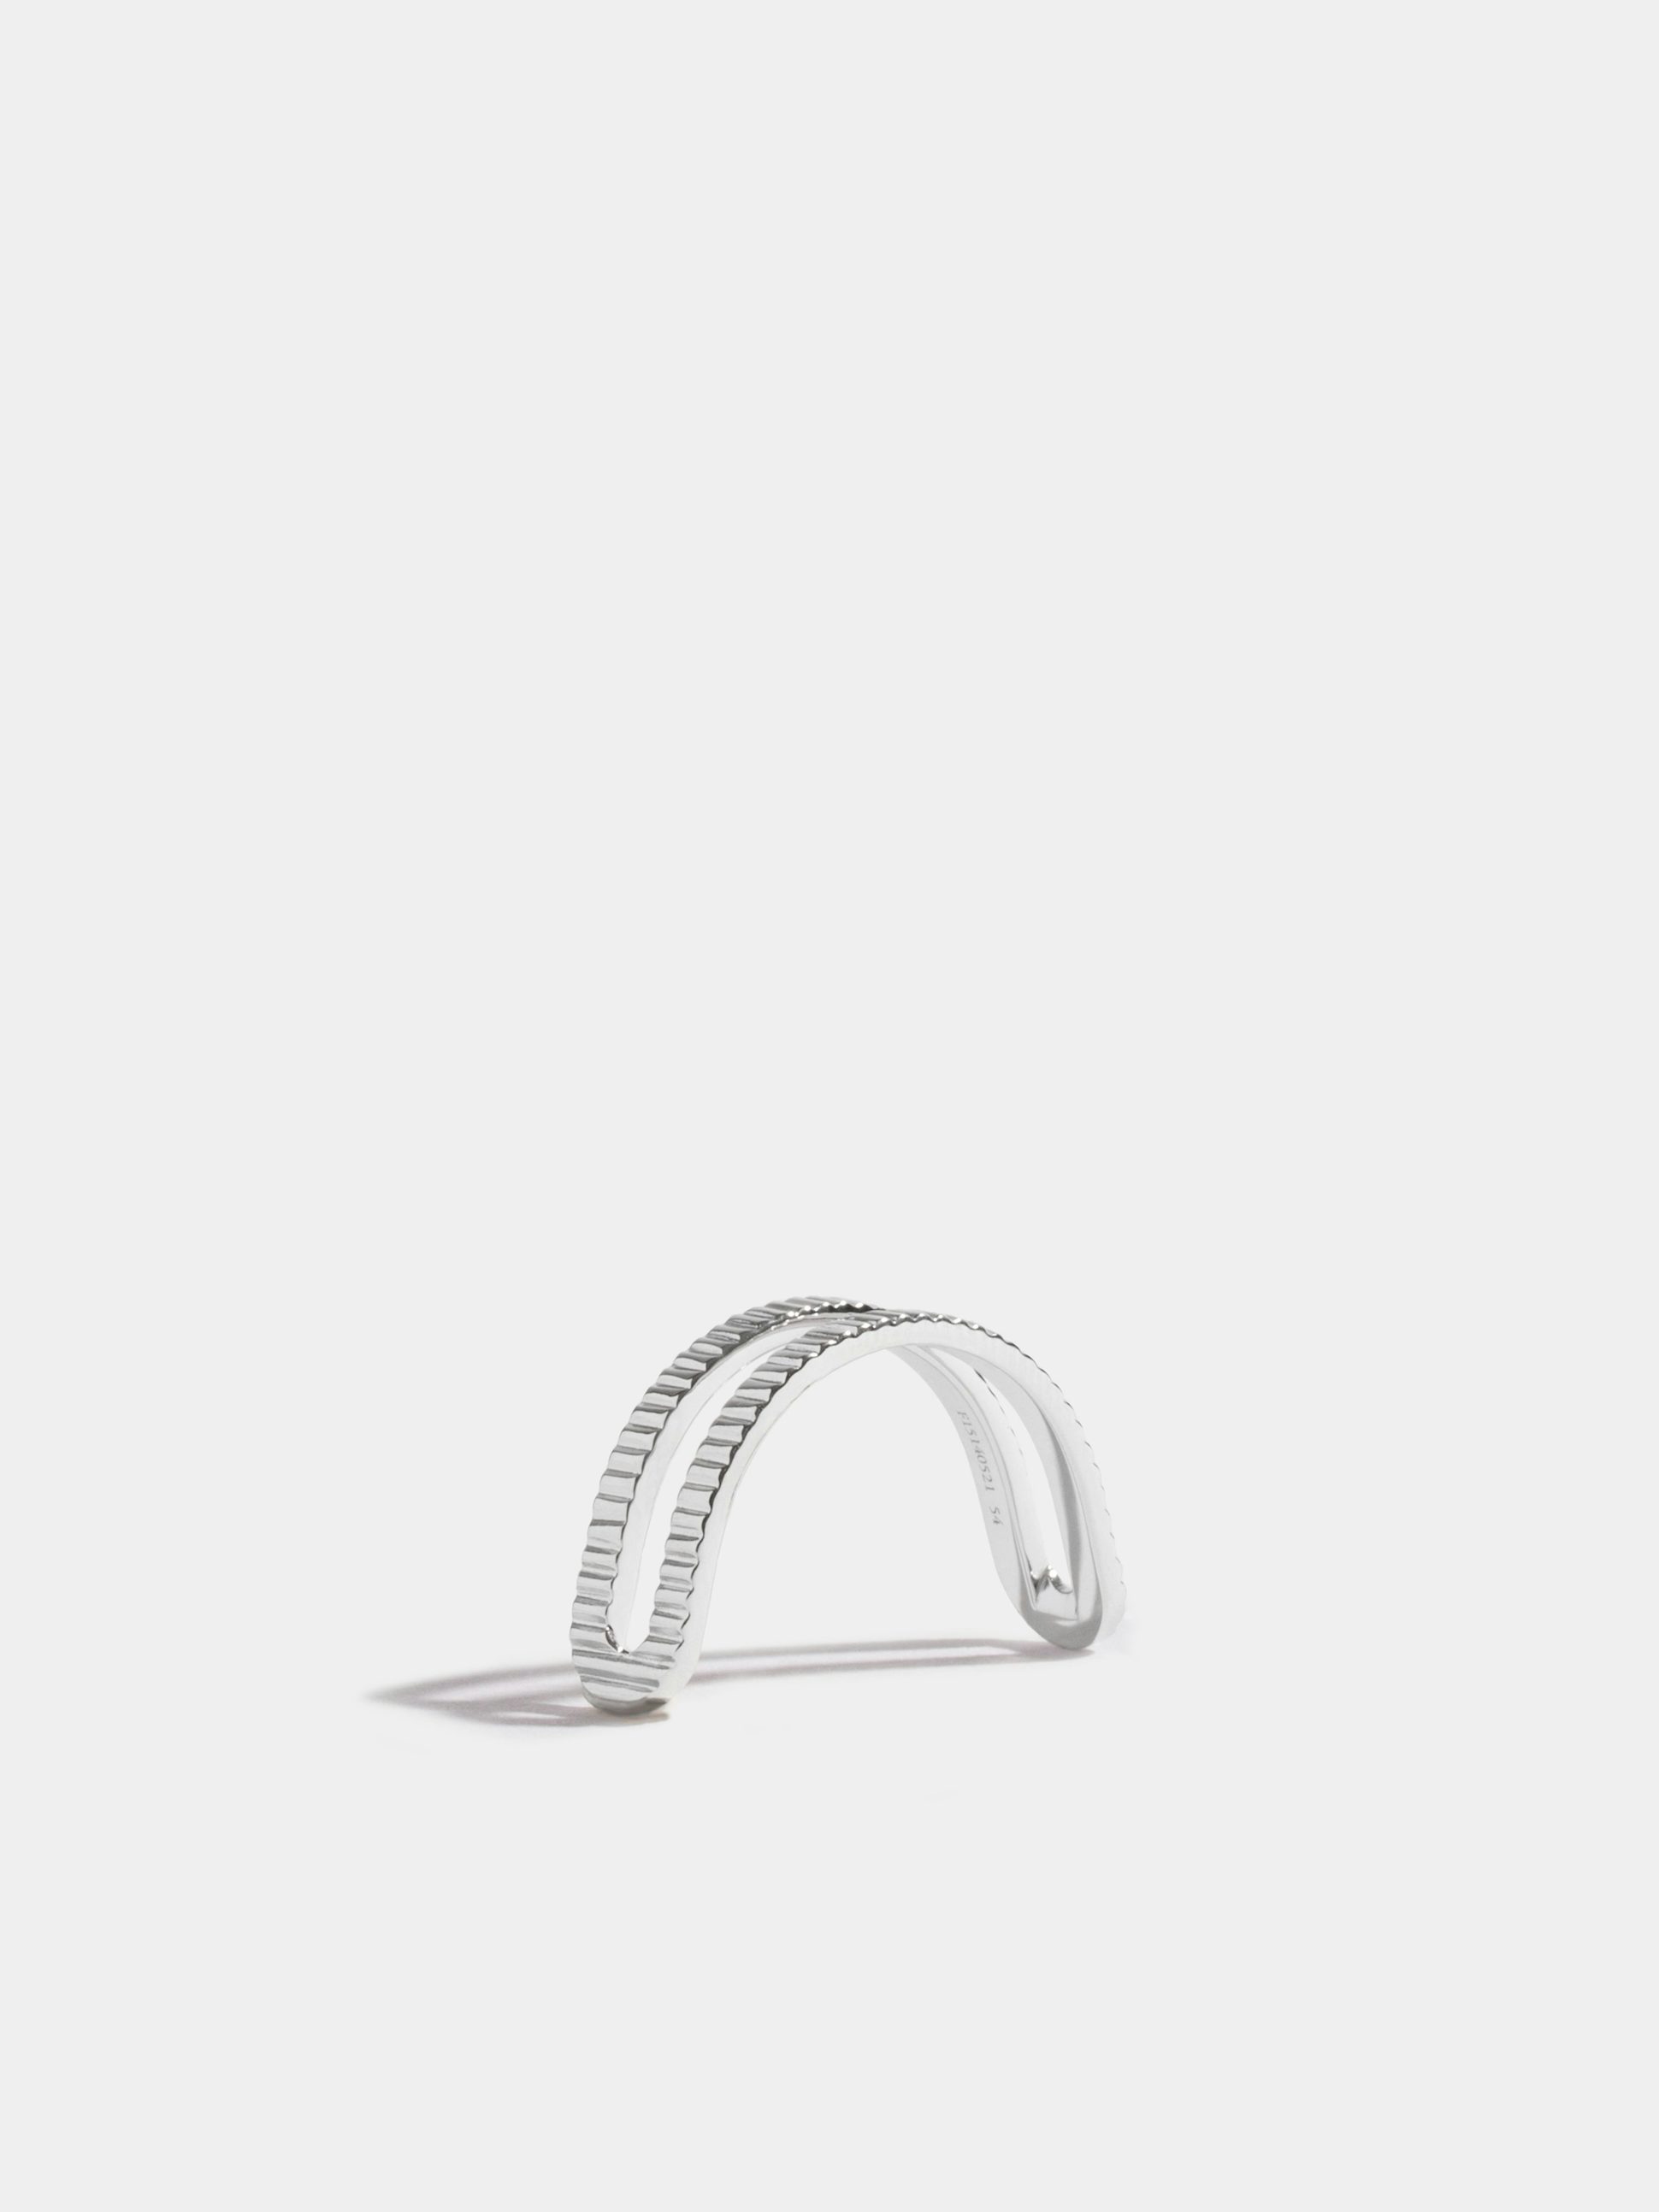 Étreintes simple half-ring in 18k Fairmined ethical white gold, with ridges finish.